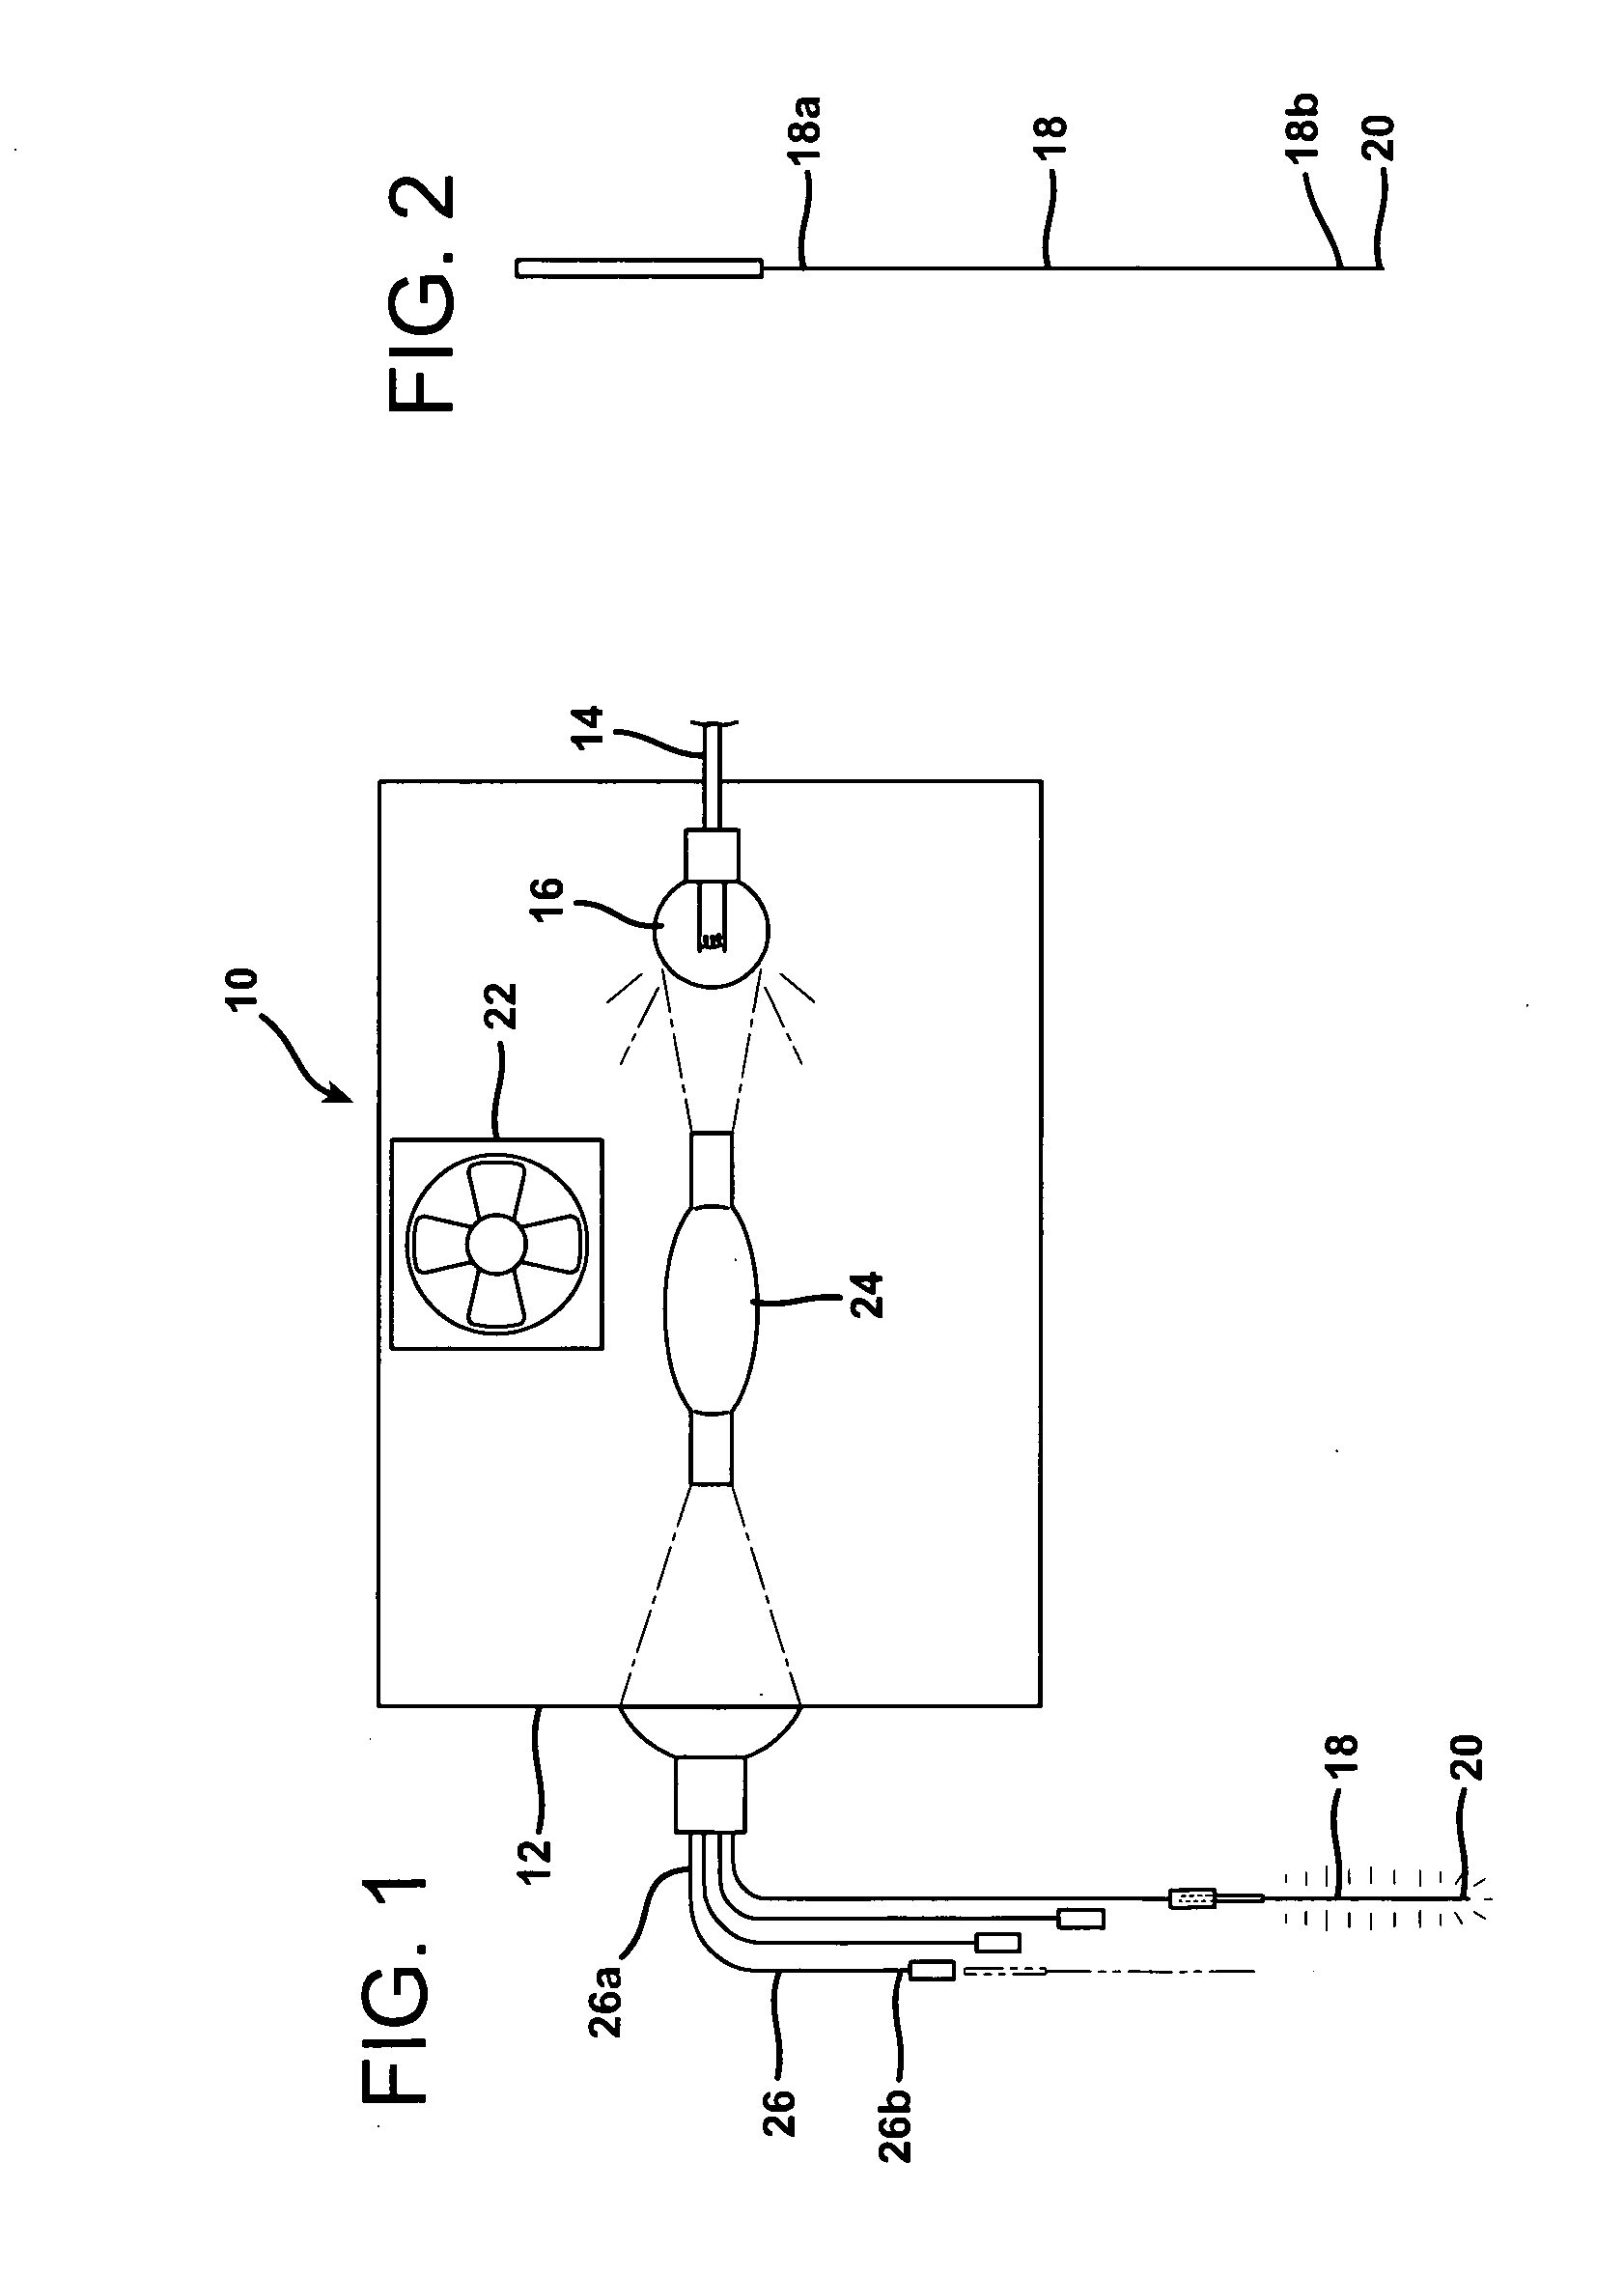 Apparatus and method for the point treatment of a patient by acupuncture and light